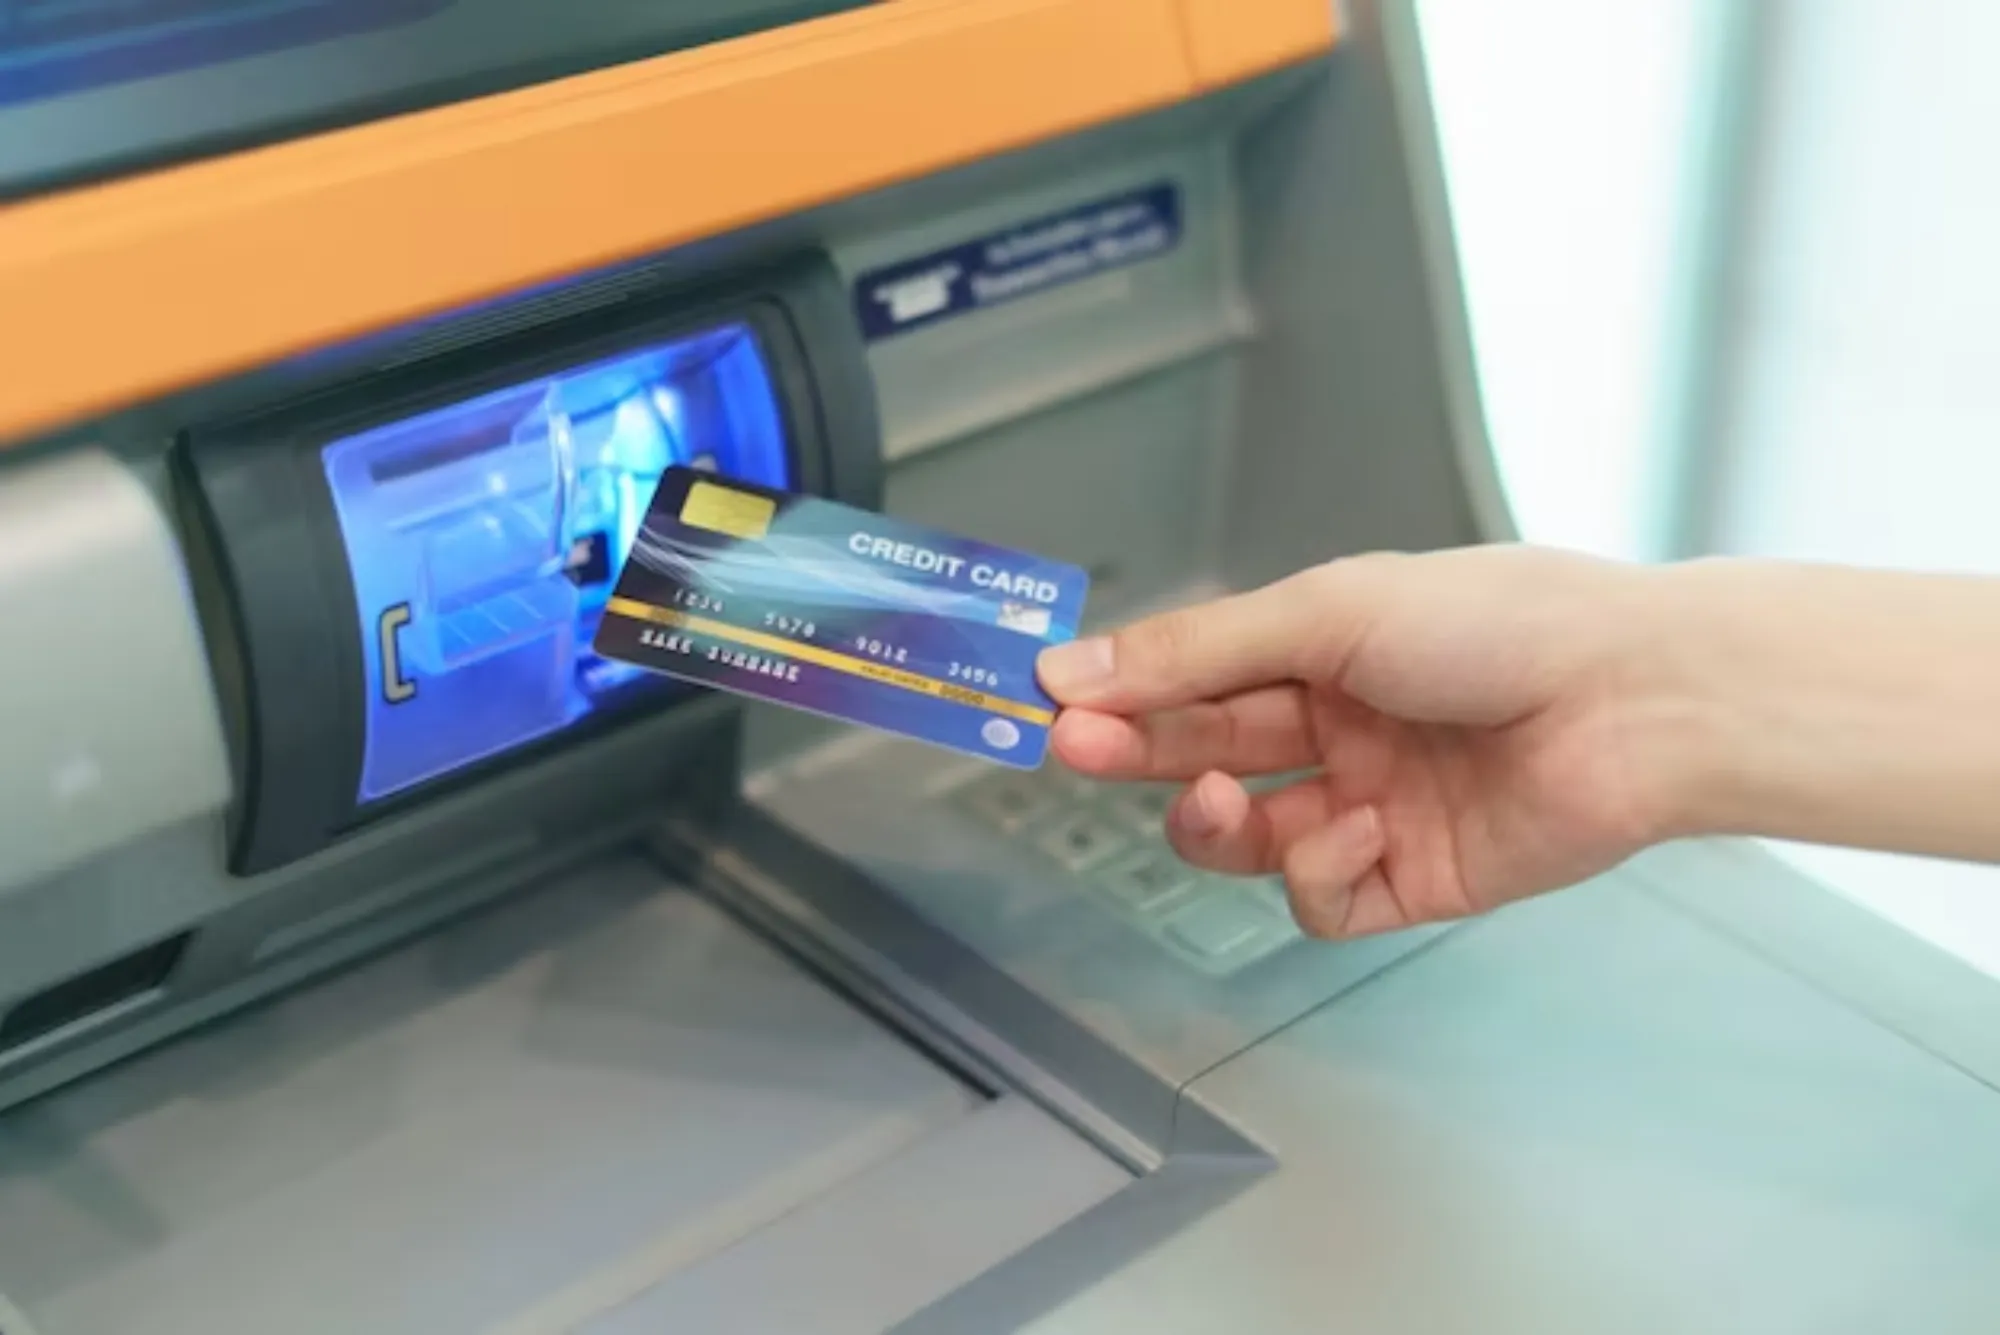 How To Withdraw Credit Card Money From Atm